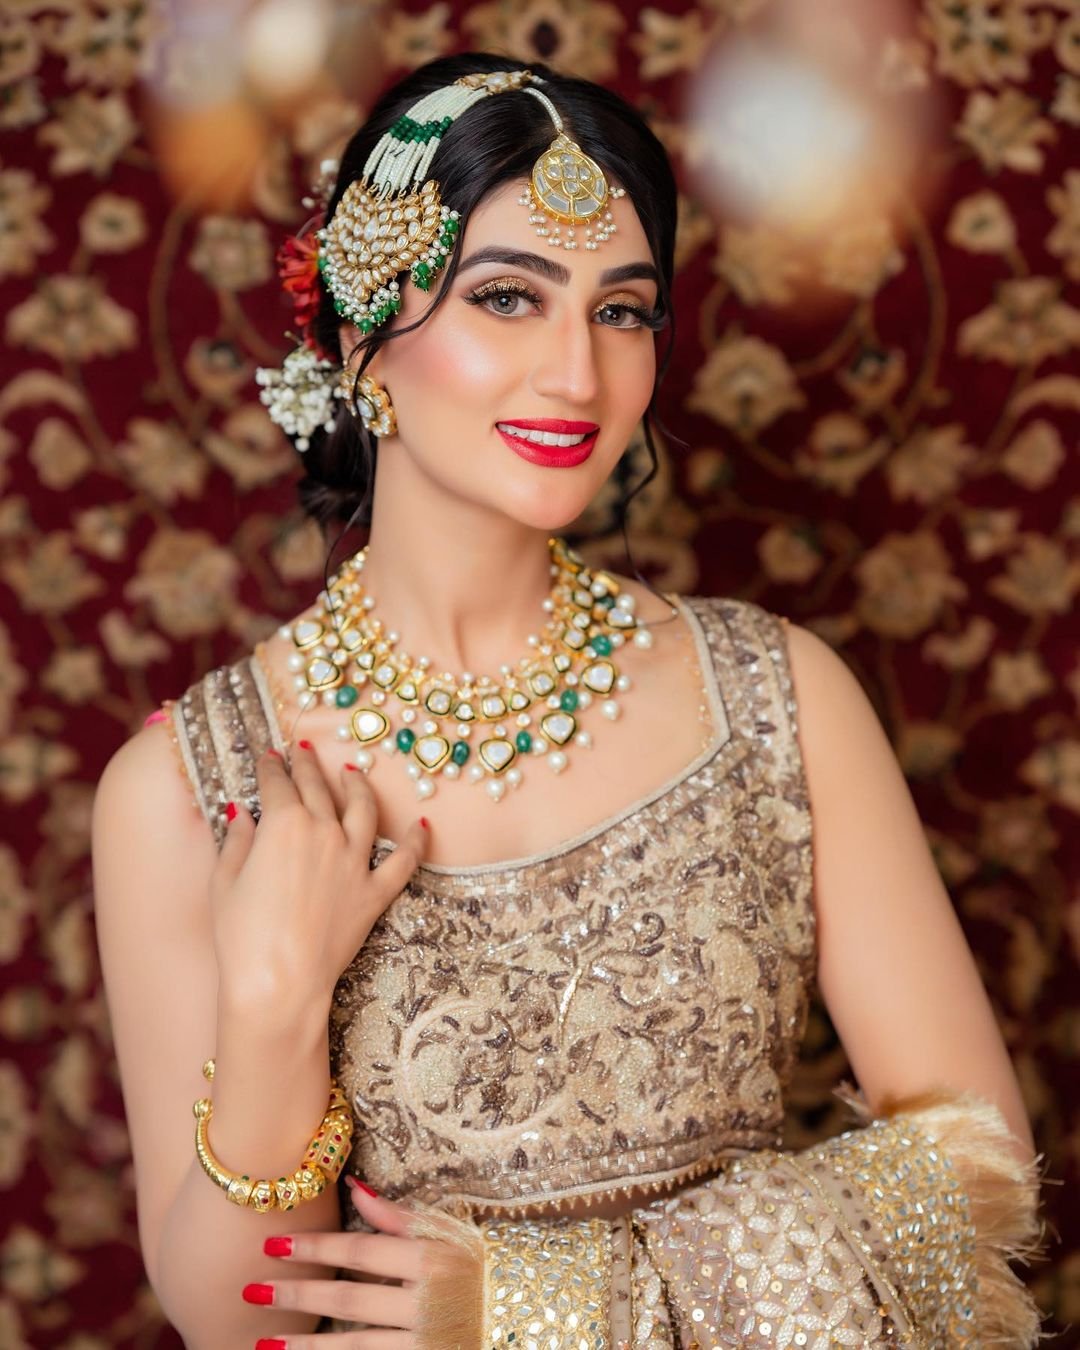 A Traditionally Modern Look Of Indian Bride